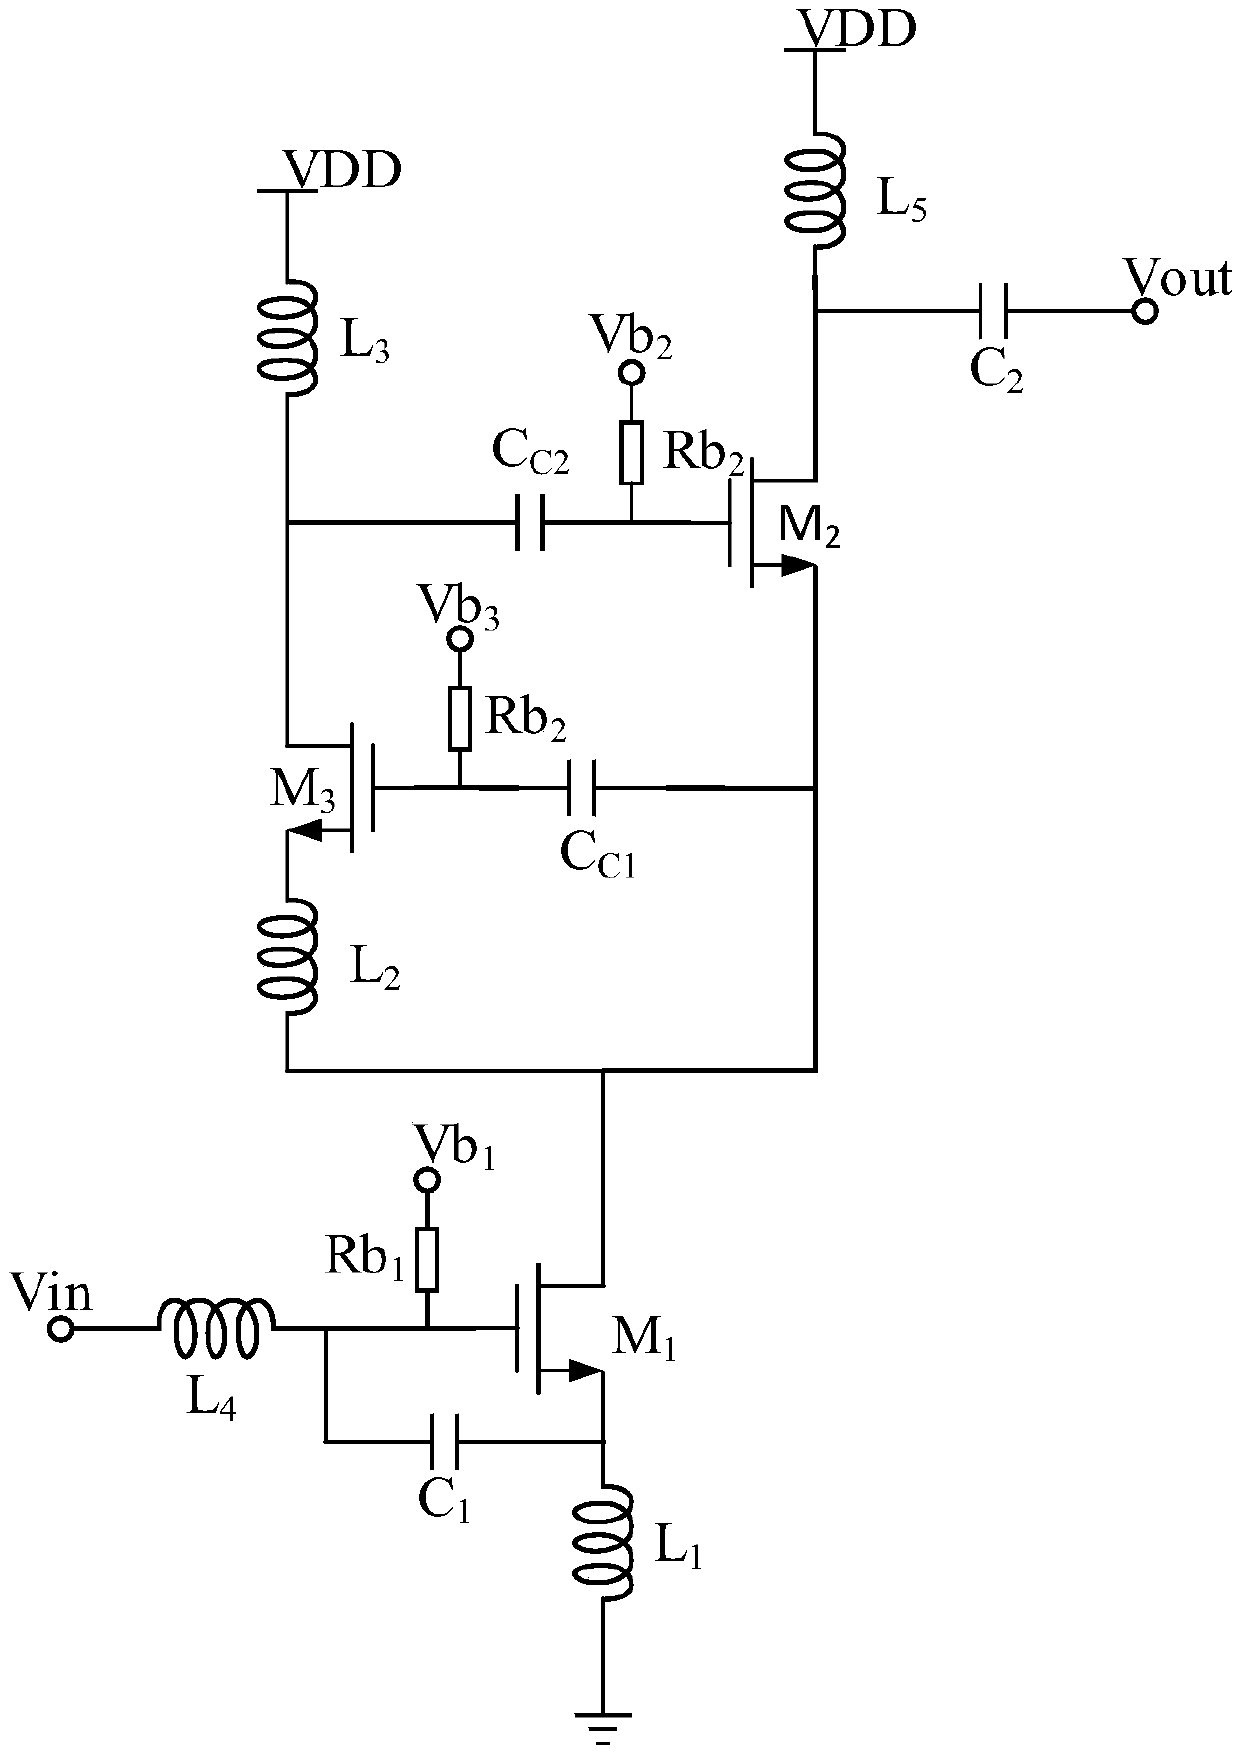 An integrated circuit of a current multiplexing gm-boost low-noise amplifier